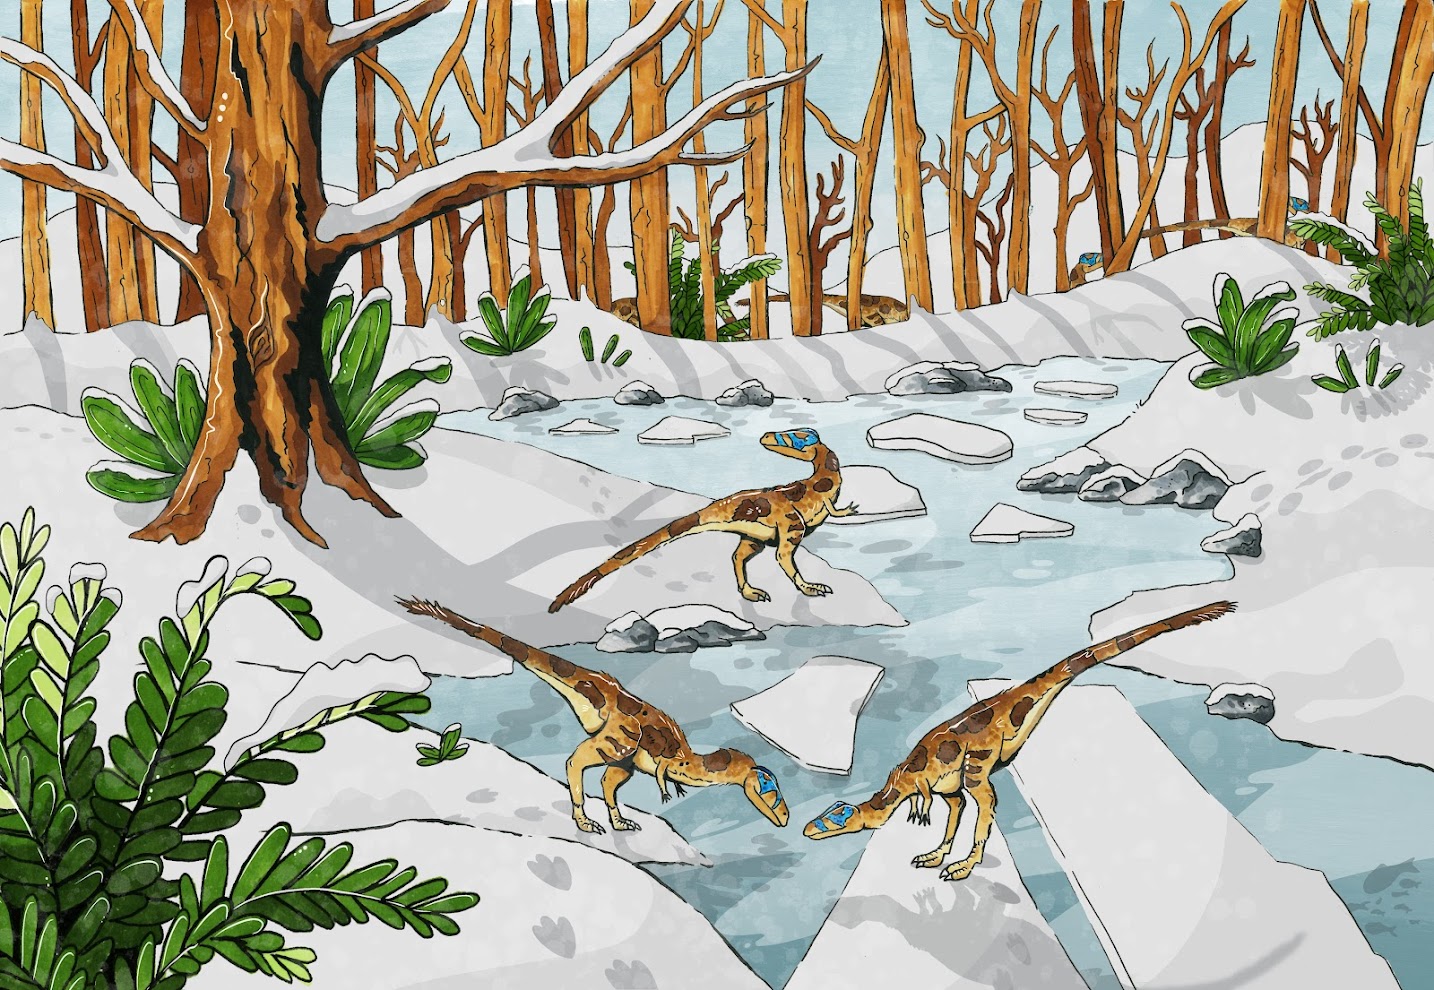 Illustration by Beth Lester showing dinosaurs interacting with a frozen river.